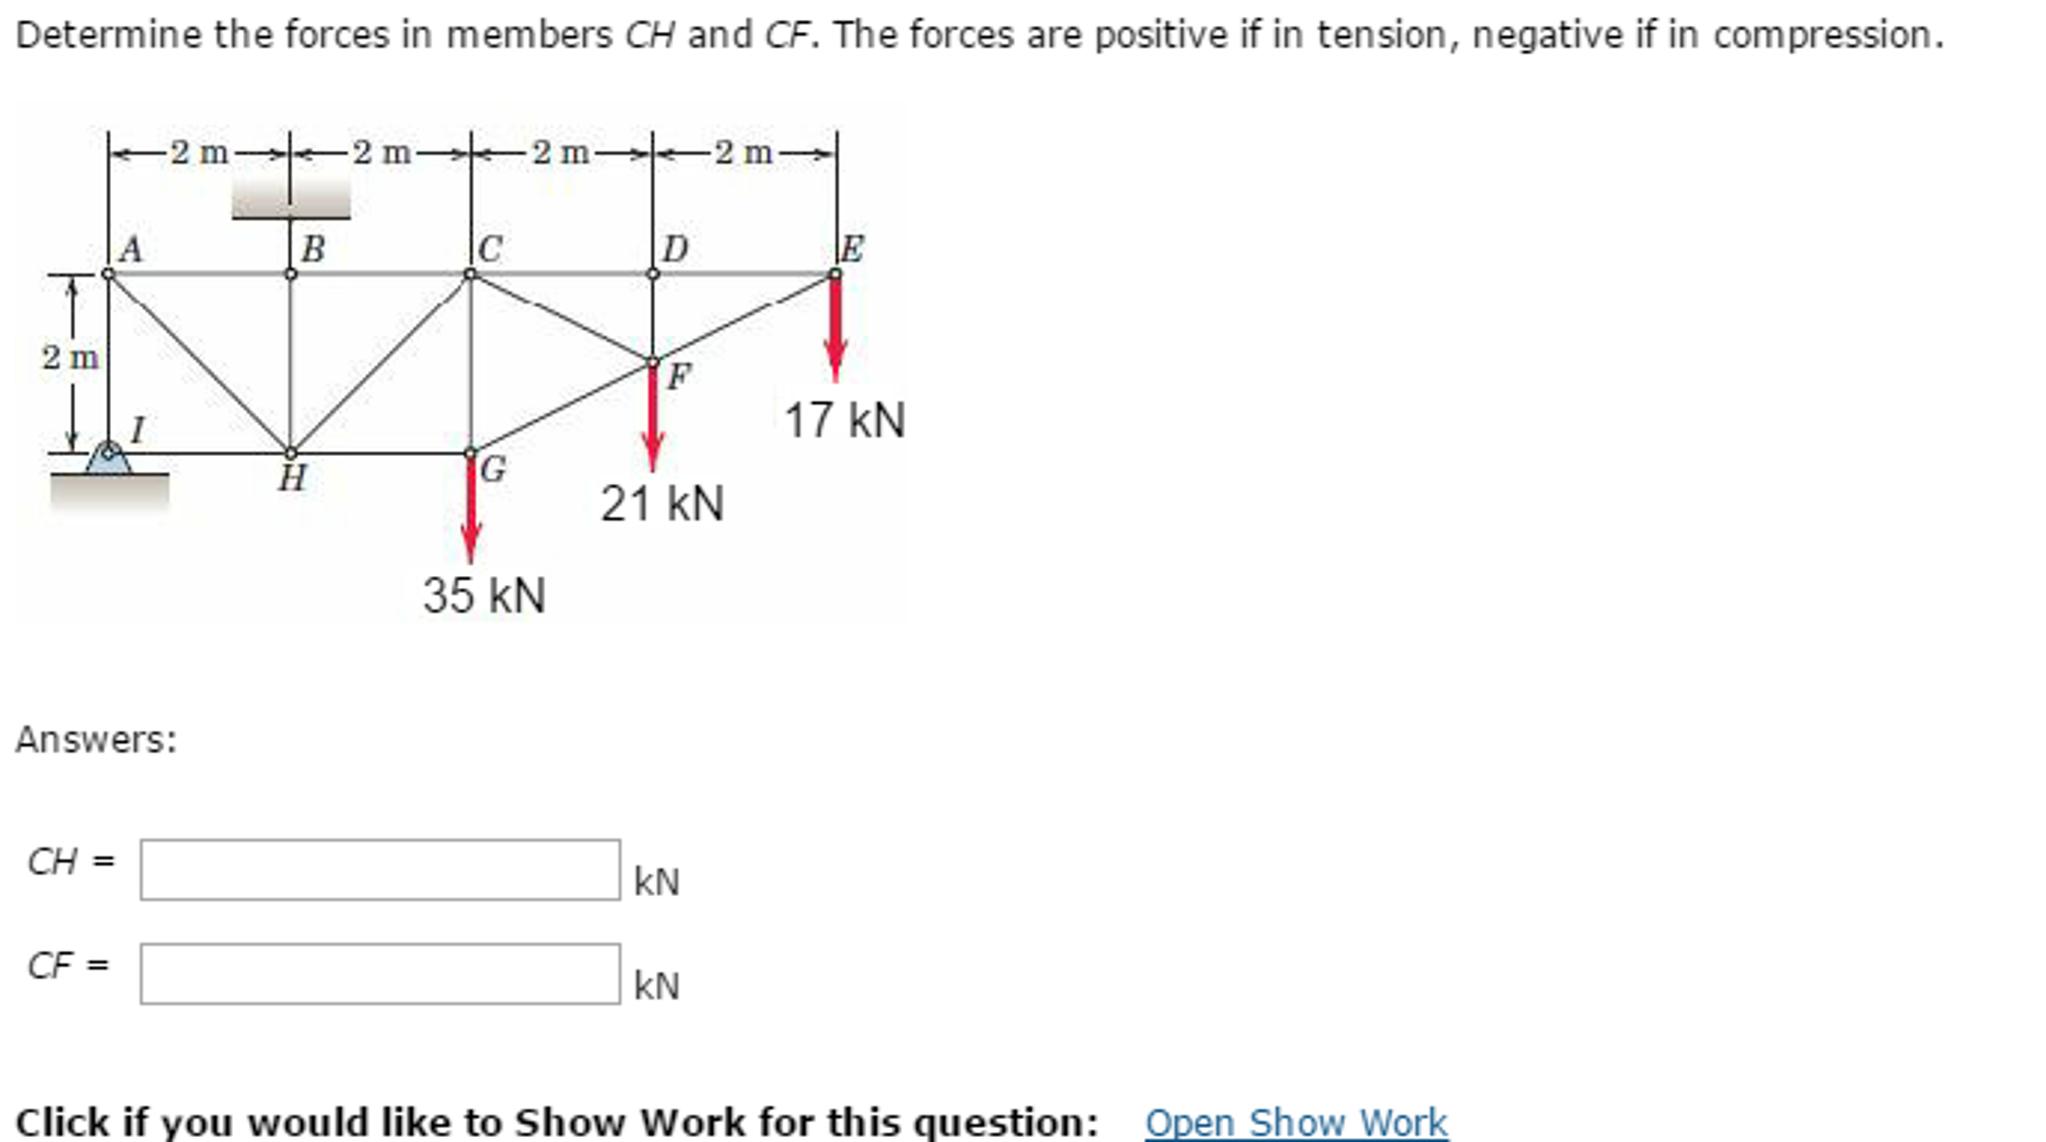 Determine the forces in members CH and CF. The for